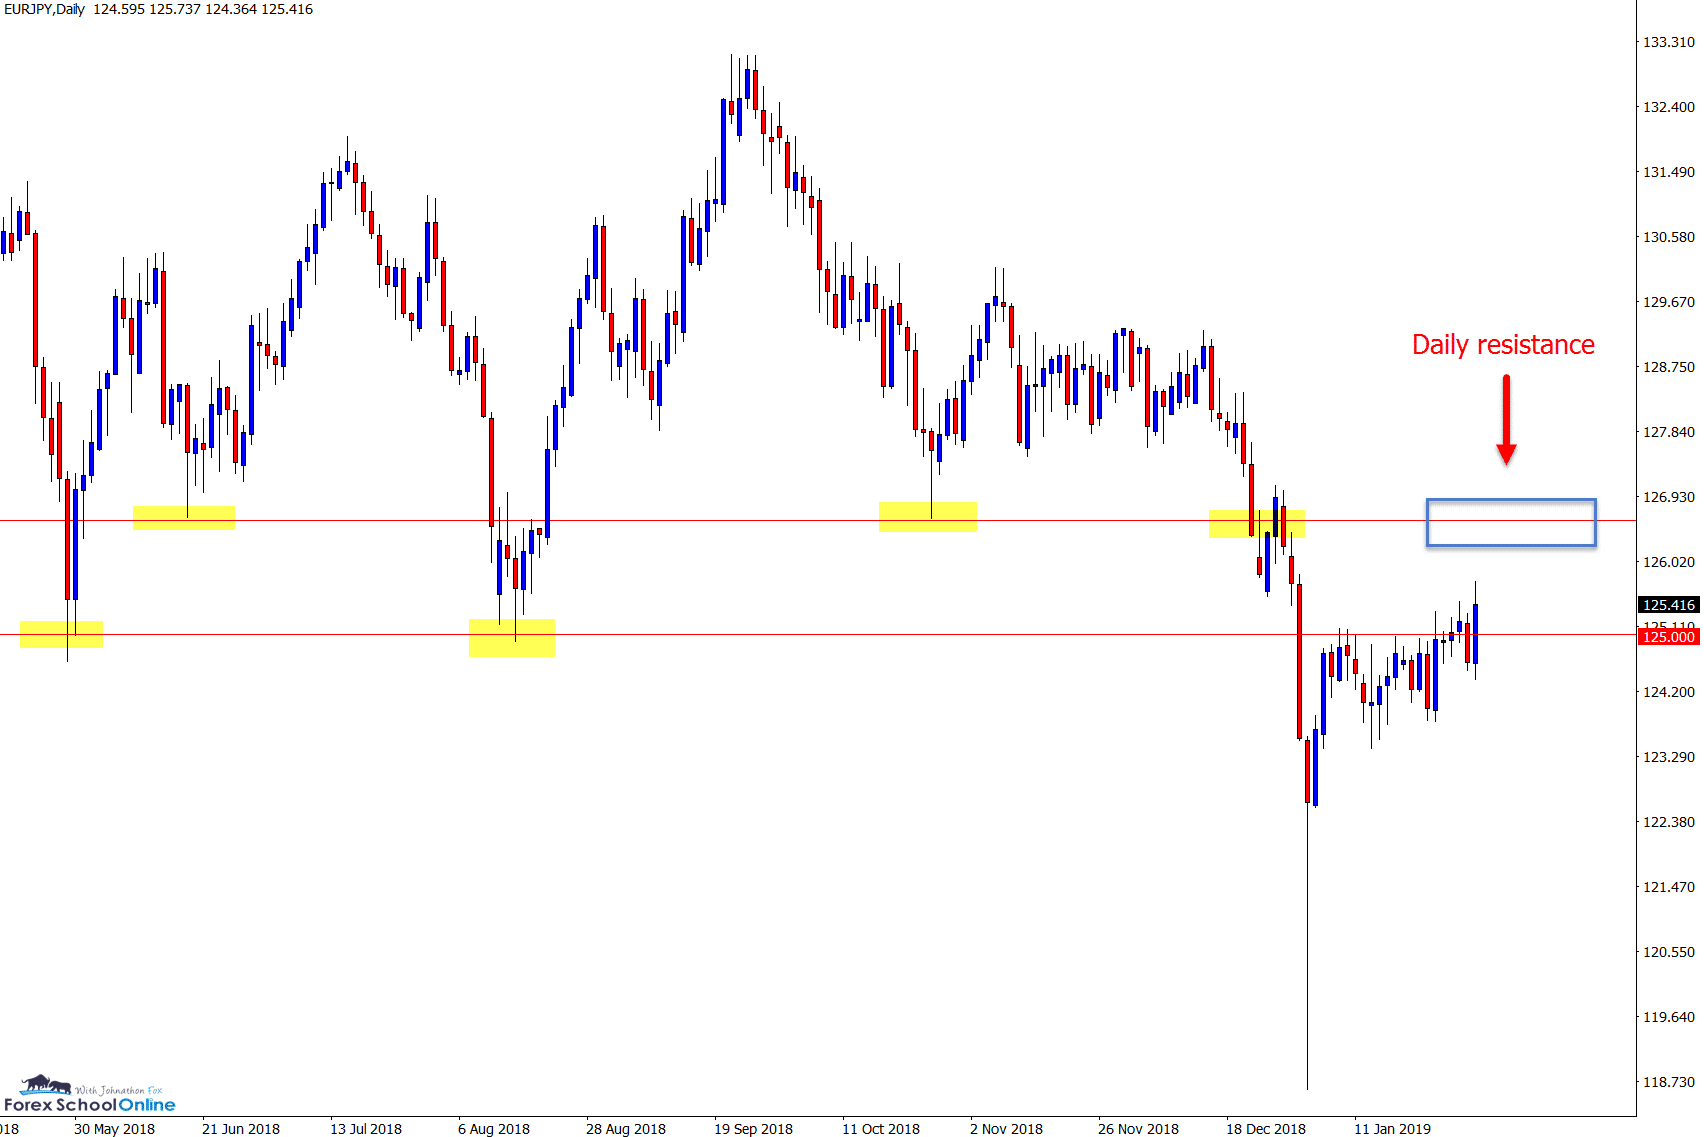 EURJPY daily chart